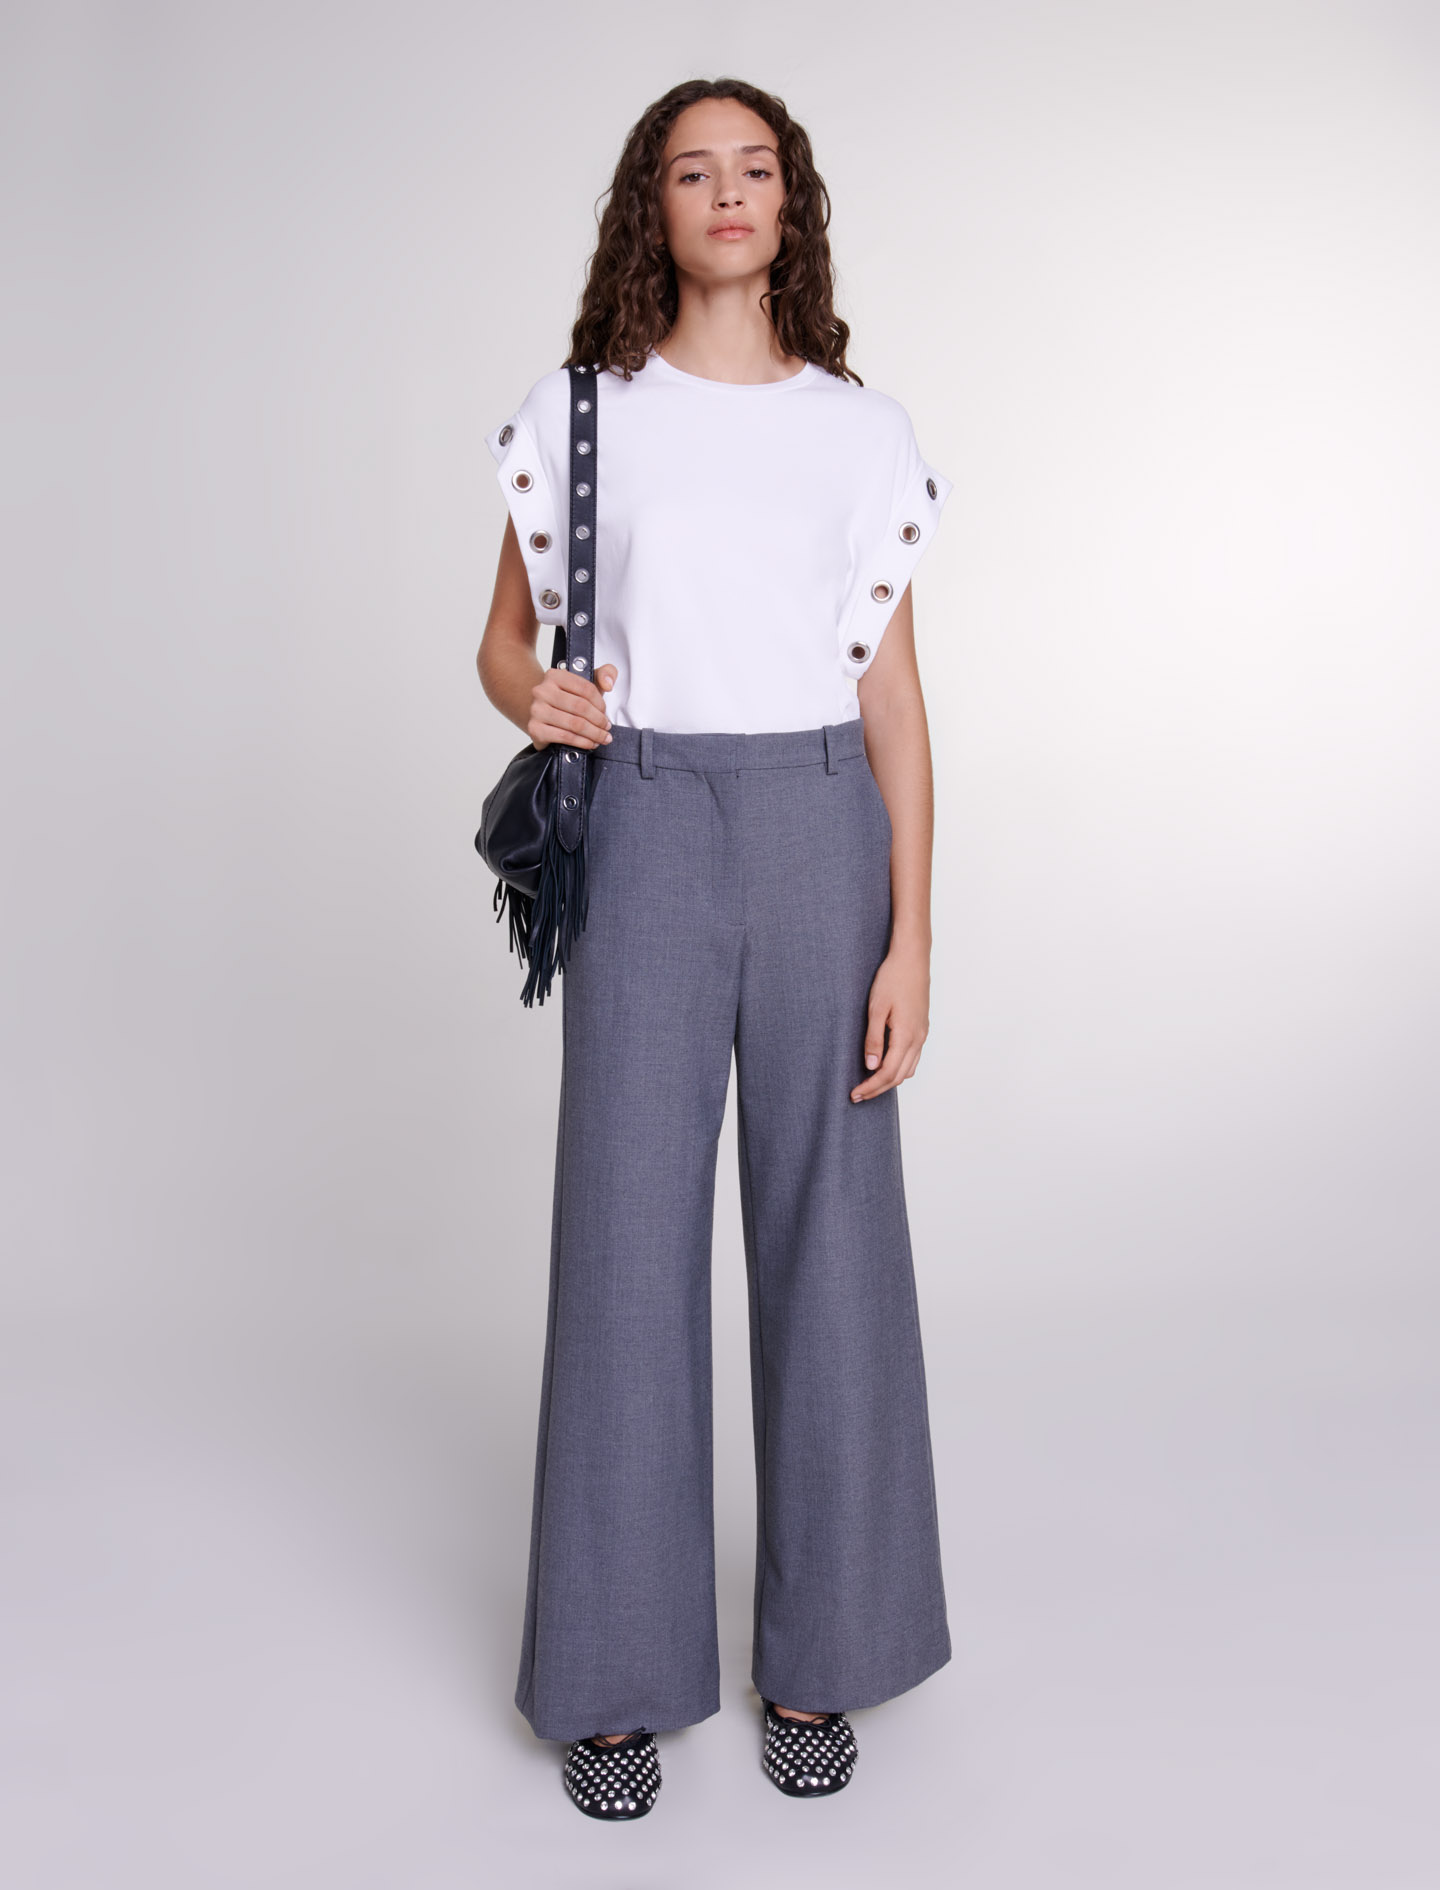 Maje Woman's polyester, Wide-leg trousers for Spring/Summer, in color Grey / Grey